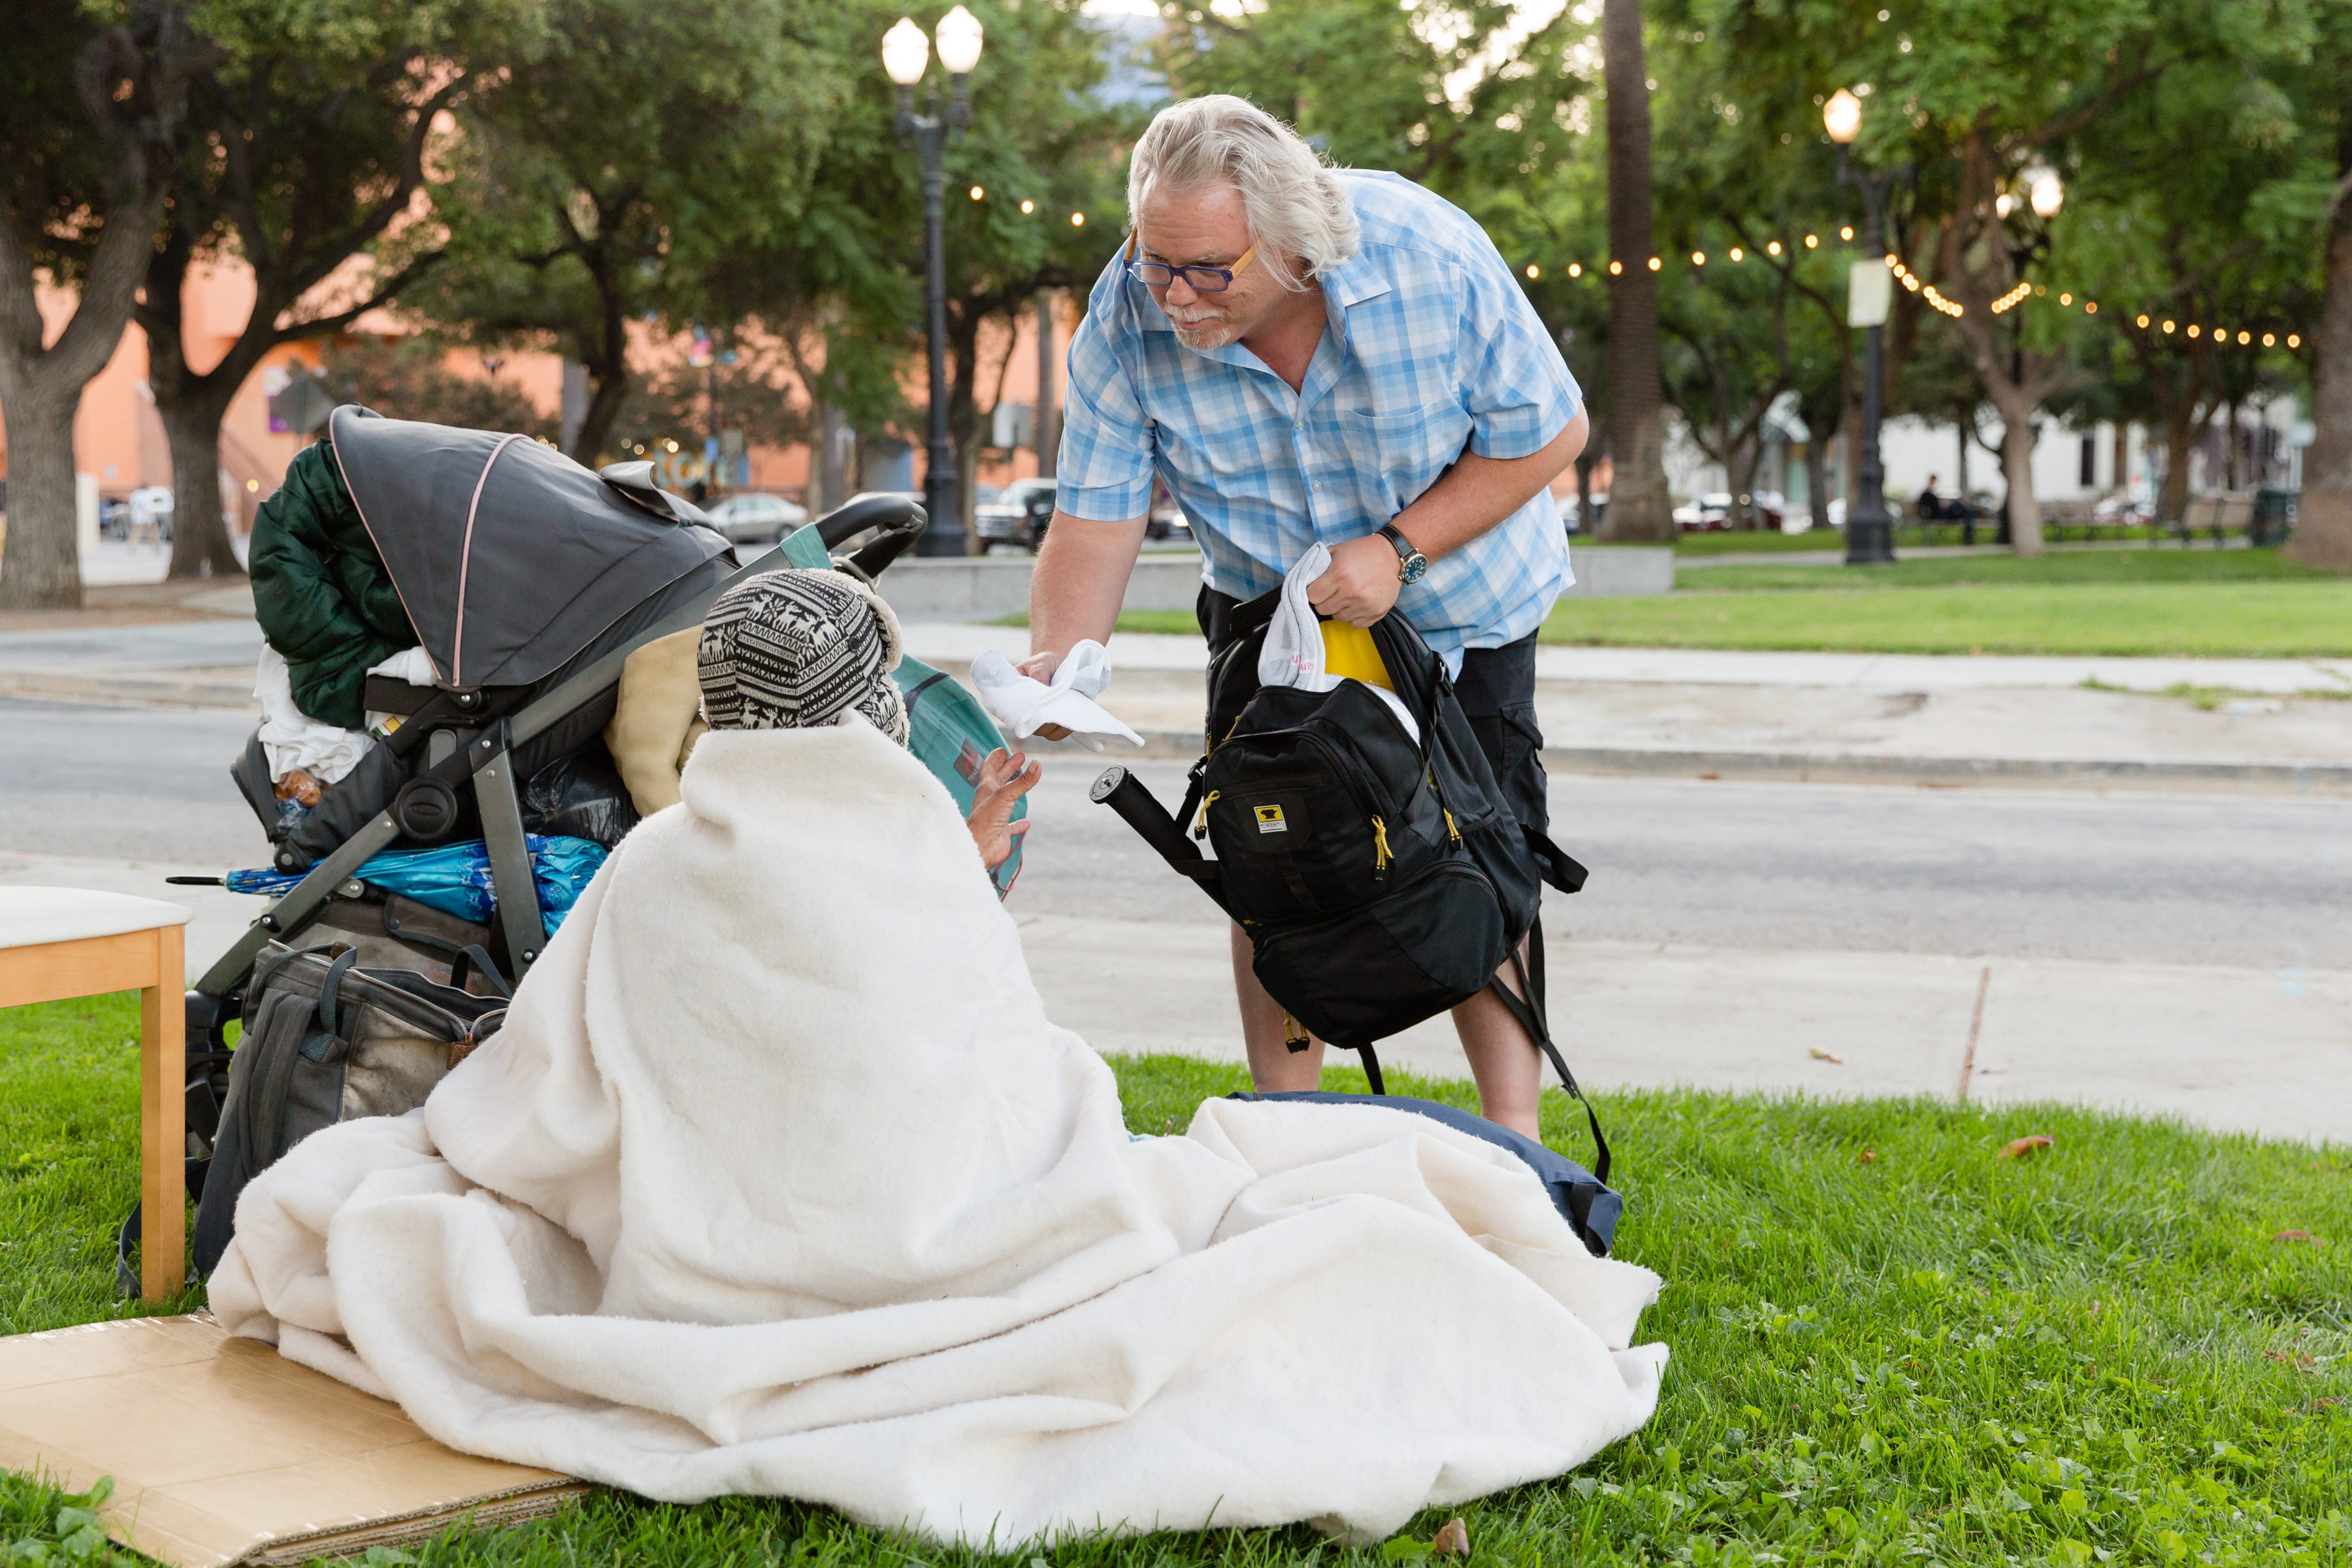 Rich man buys homeless man. Help to homeless. A woman helping a homeless man. Invisible people Mark Hovath poverty.